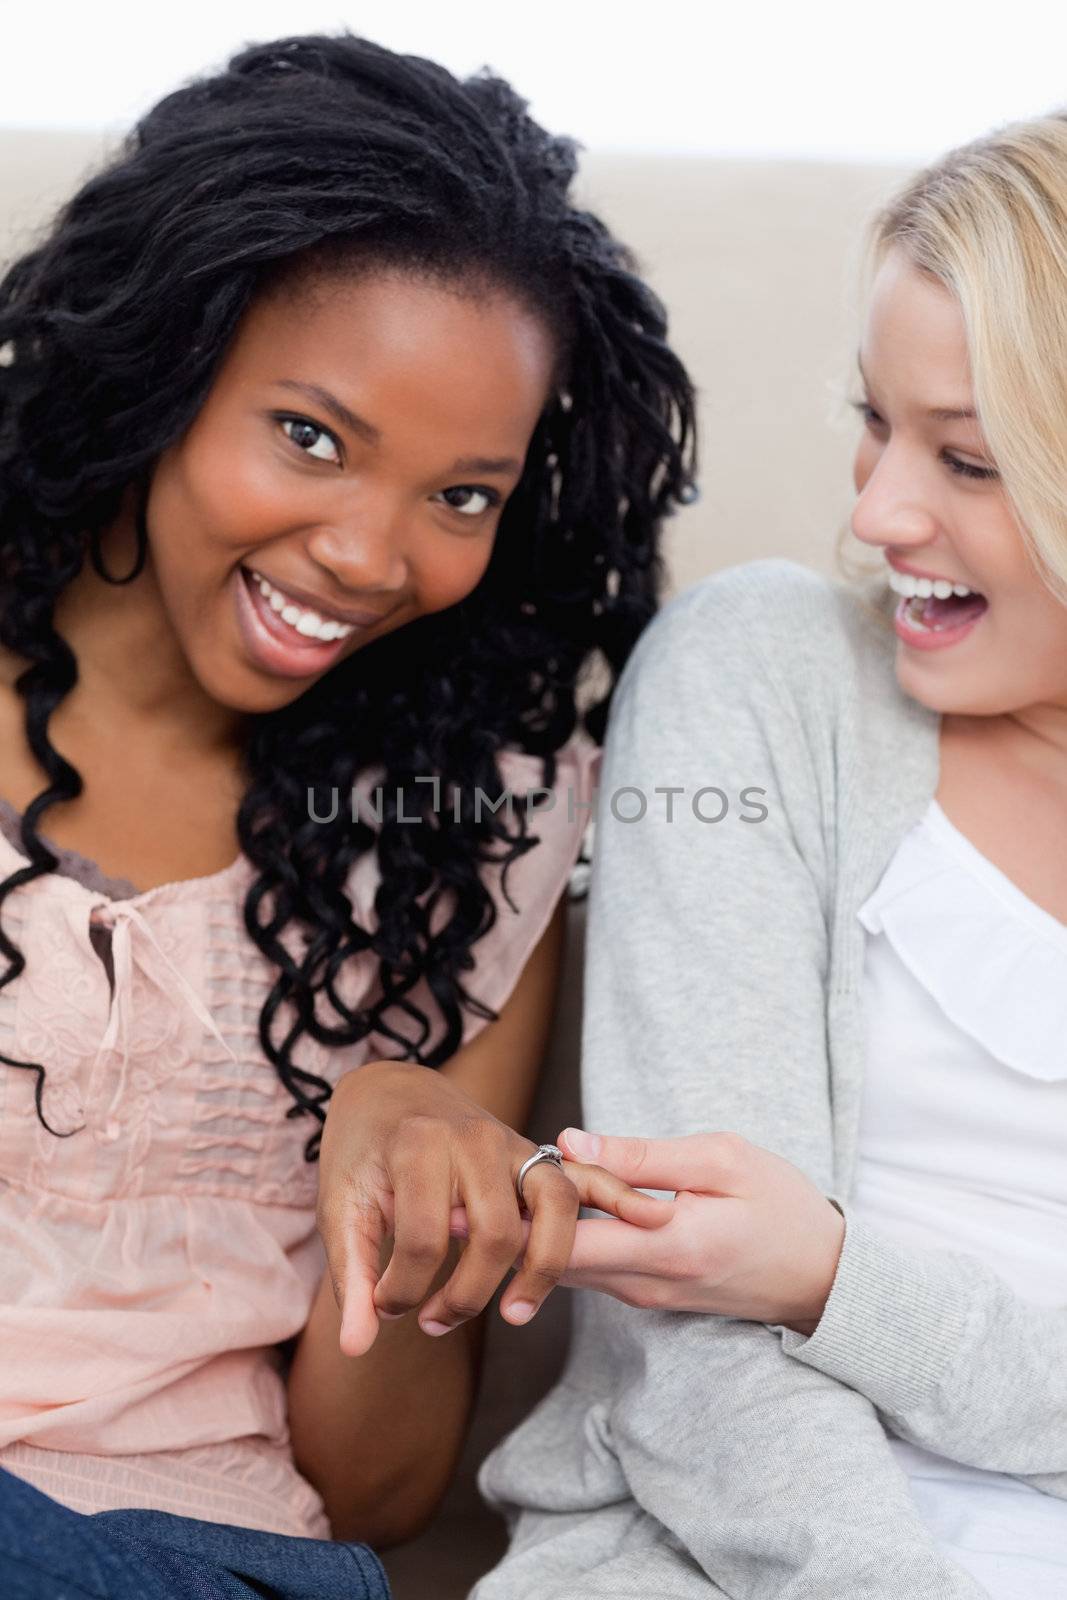 A smiling woman is looking at the camera and showing her friend her wedding ring